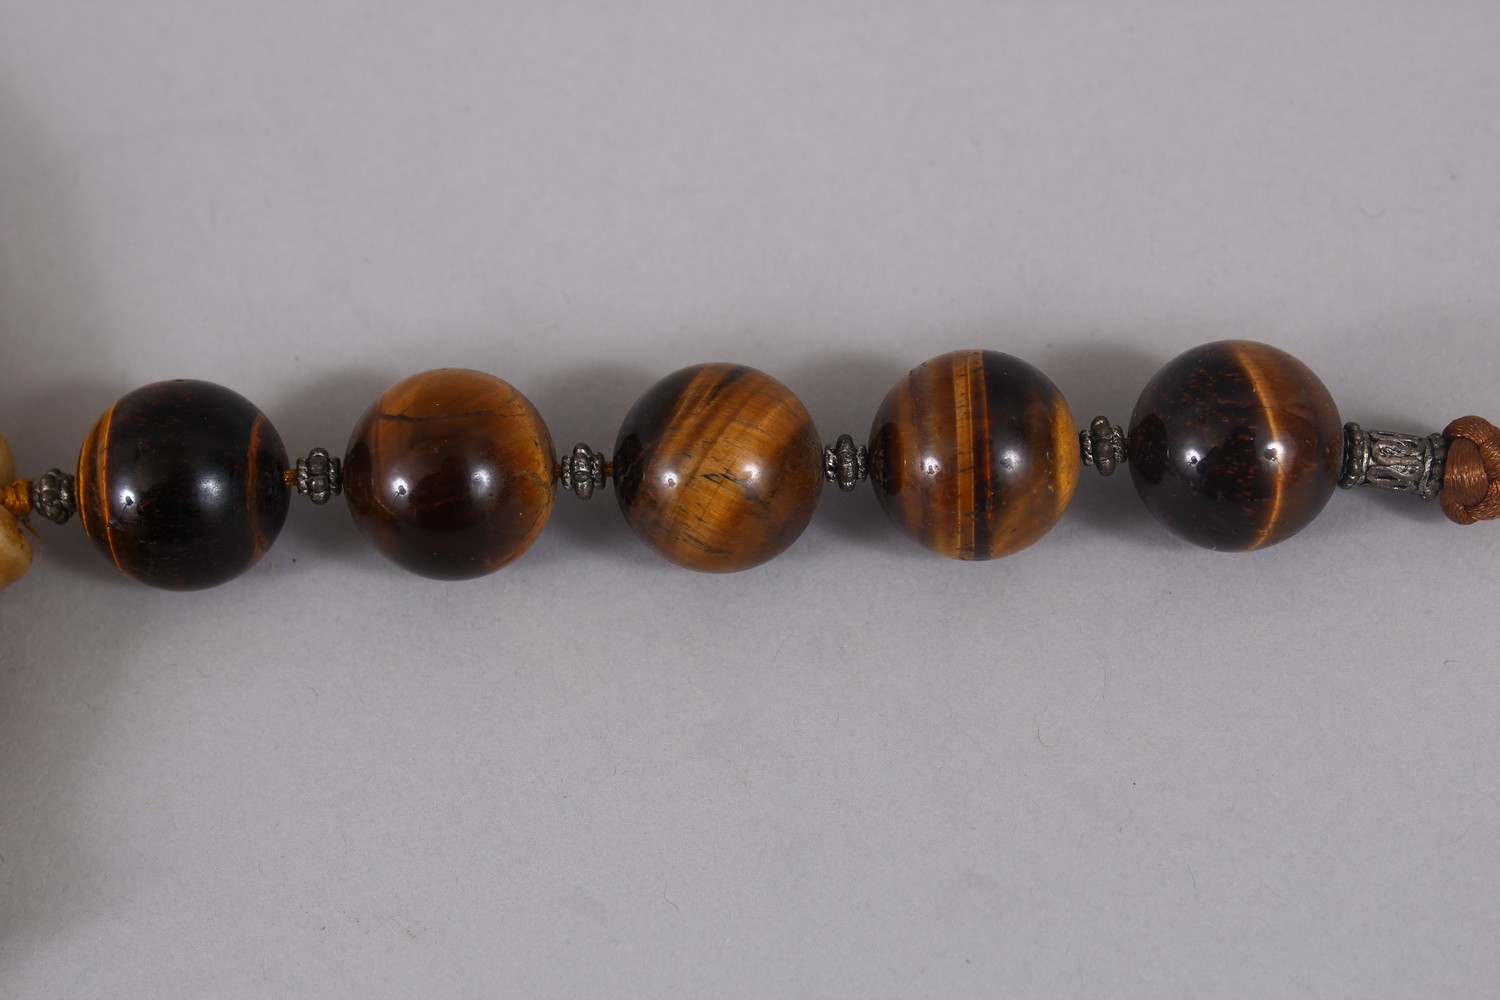 A GOOD 19TH / 20TH CENTURY CHINESE CARVED NEPHRITE HARDSTONE ROUNDEL WITH TIGER EYE BEADS, the - Image 4 of 4